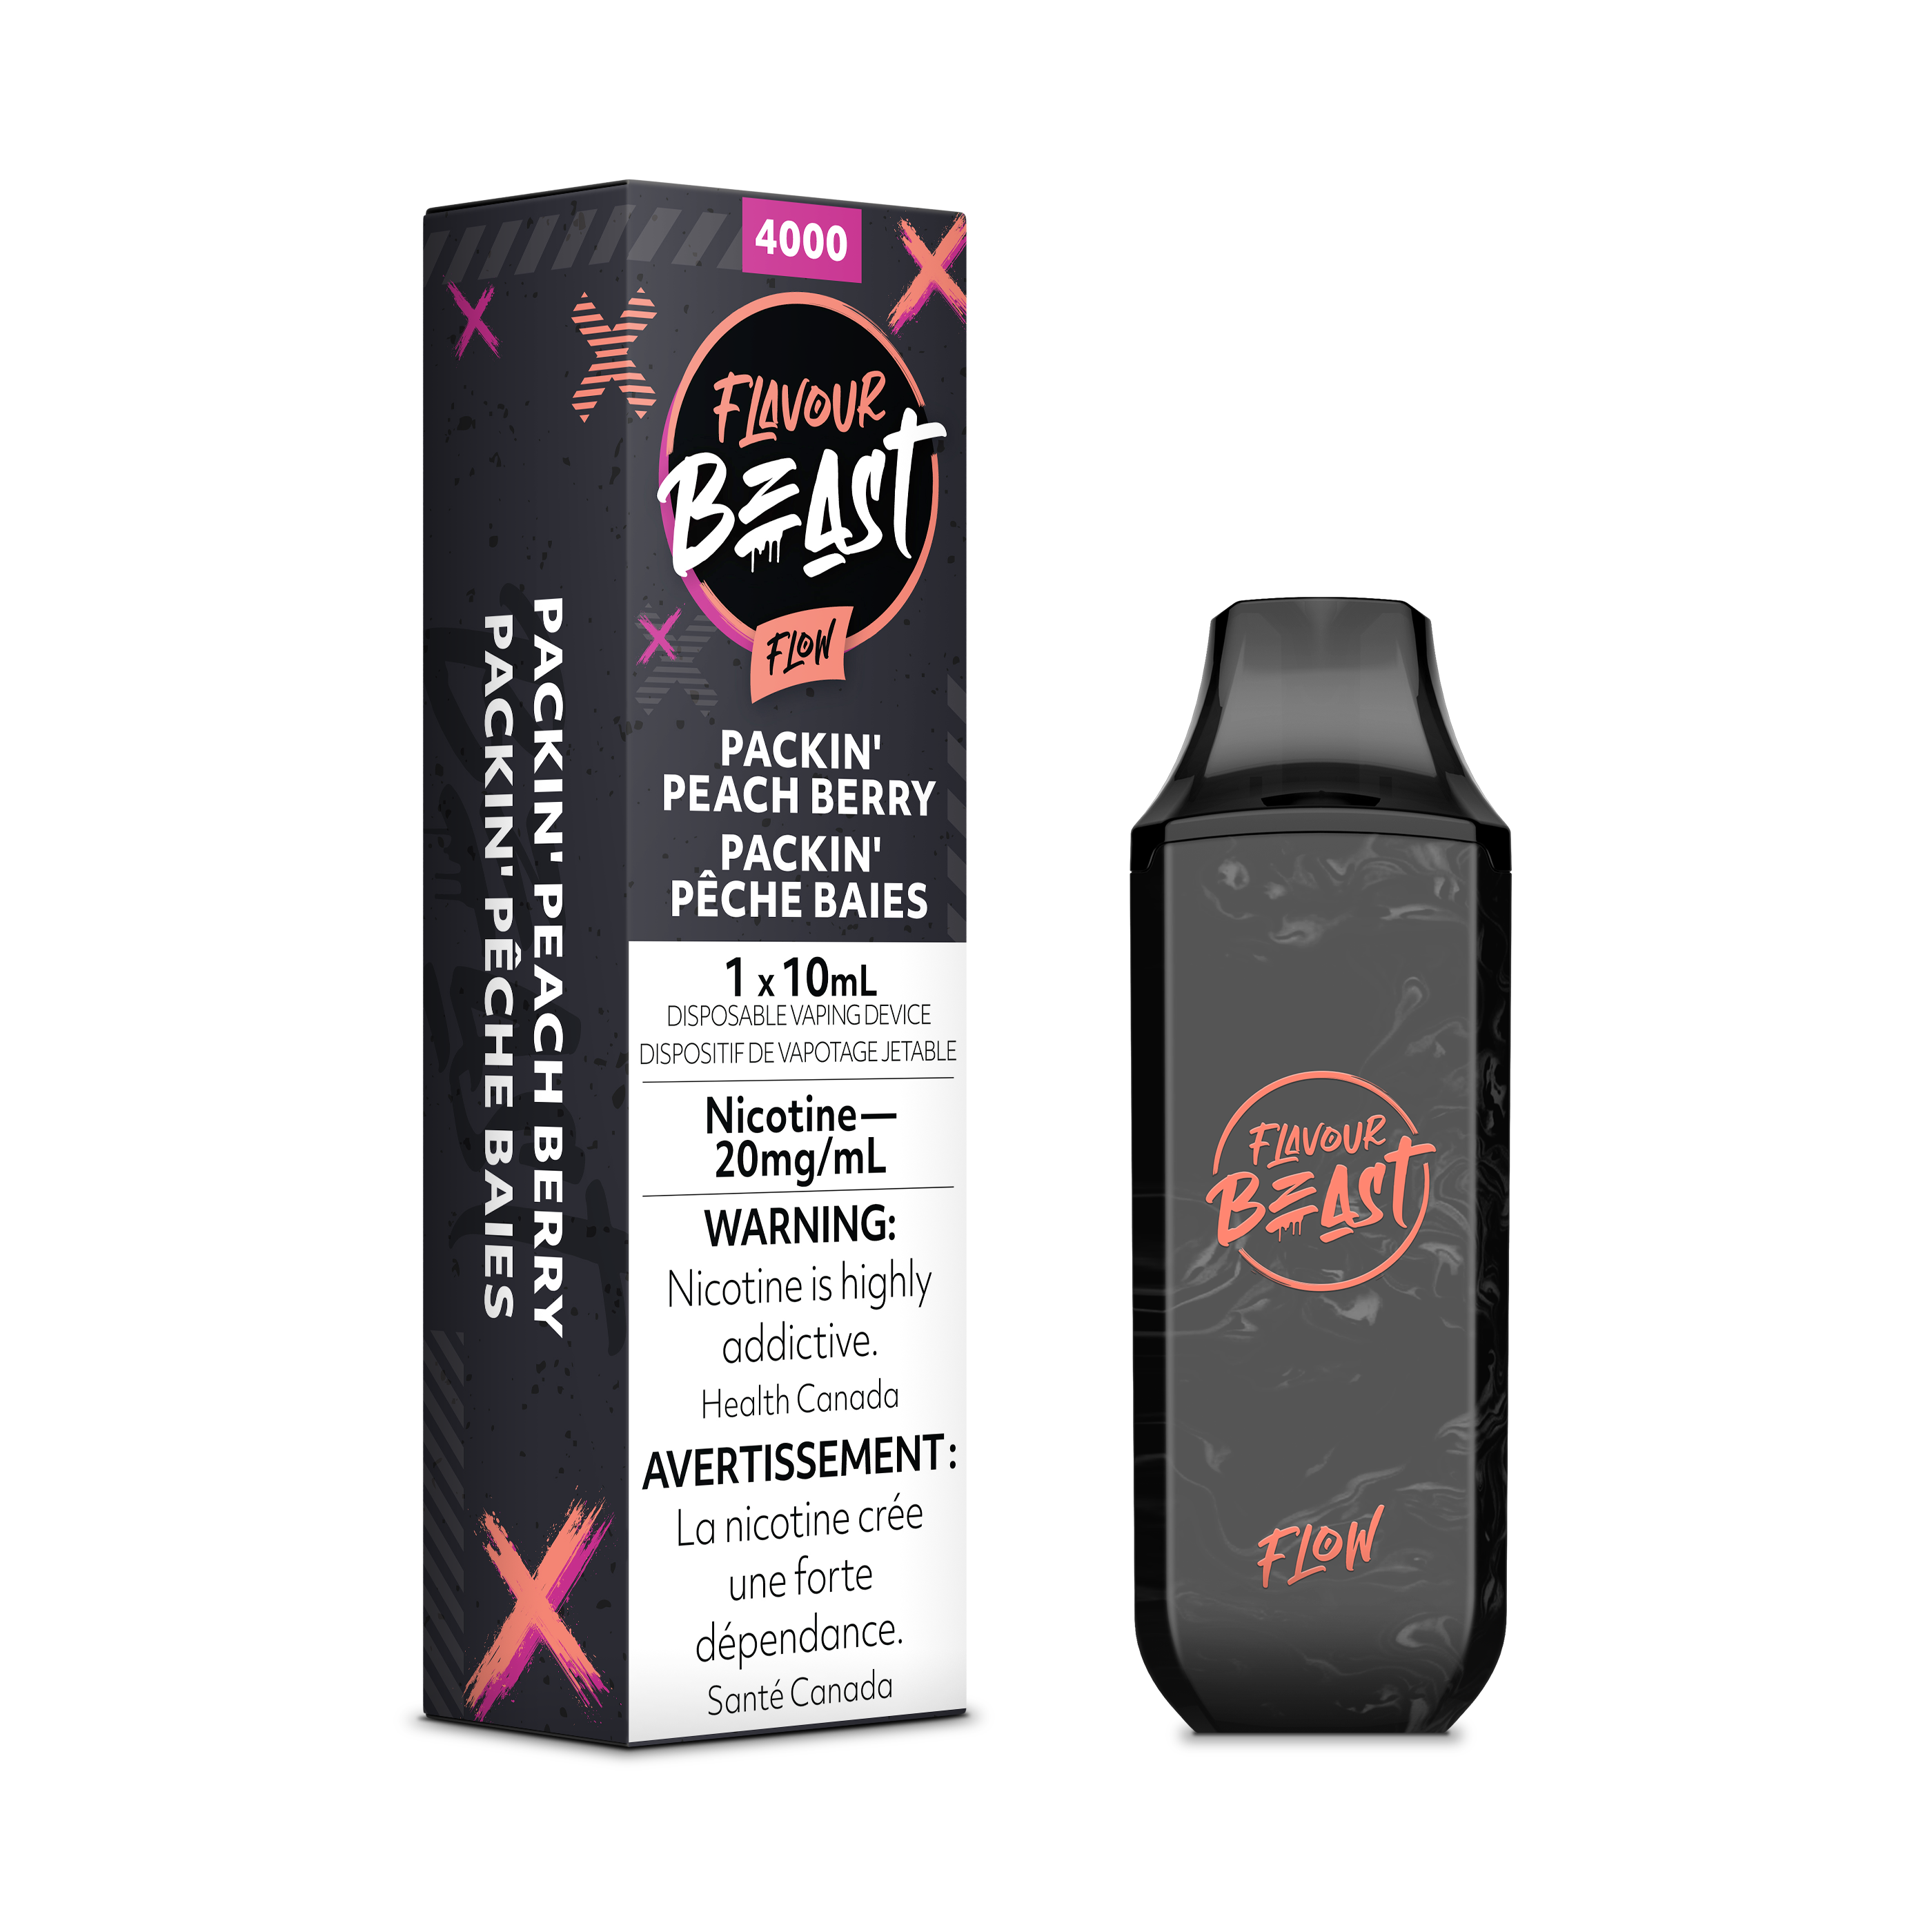 Packin' Peach Berry - Flavour Beast Flow 4000 - EXCISED